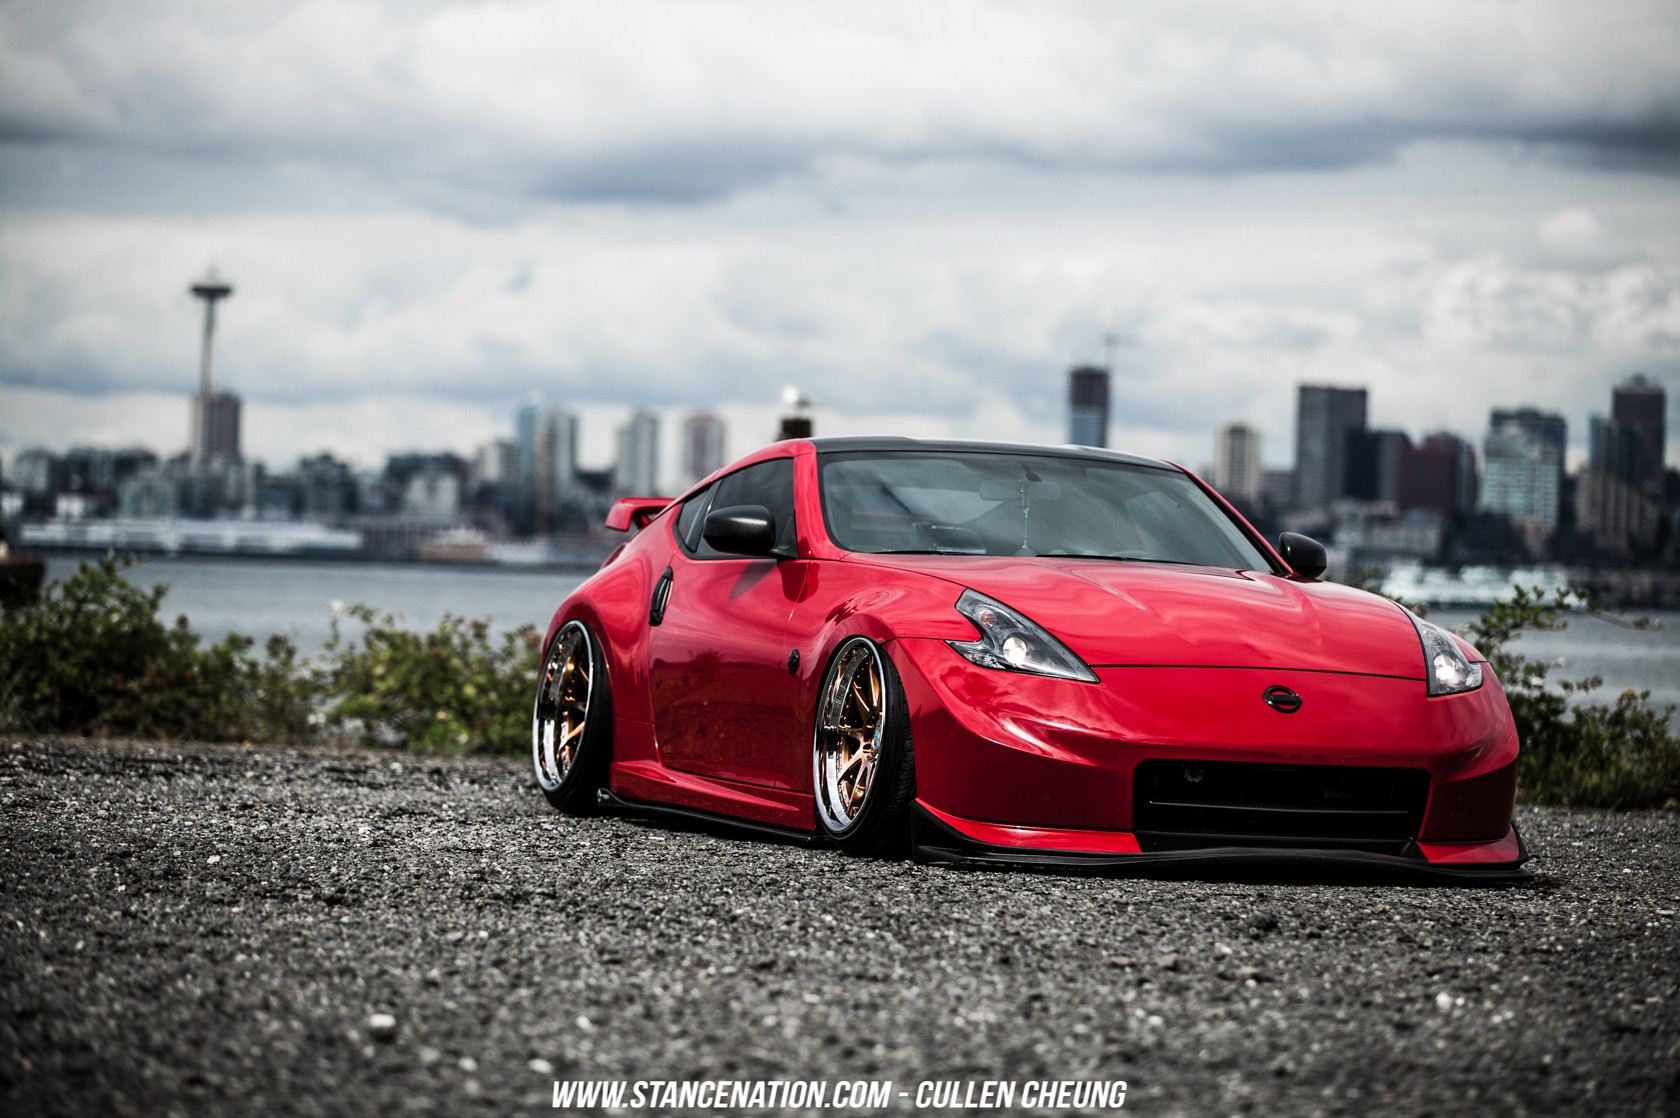 General 1680x1118 red cars Japanese cars tuning Nissan 370Z Nissan Nissan Fairlady Z car watermarked vehicle coupe